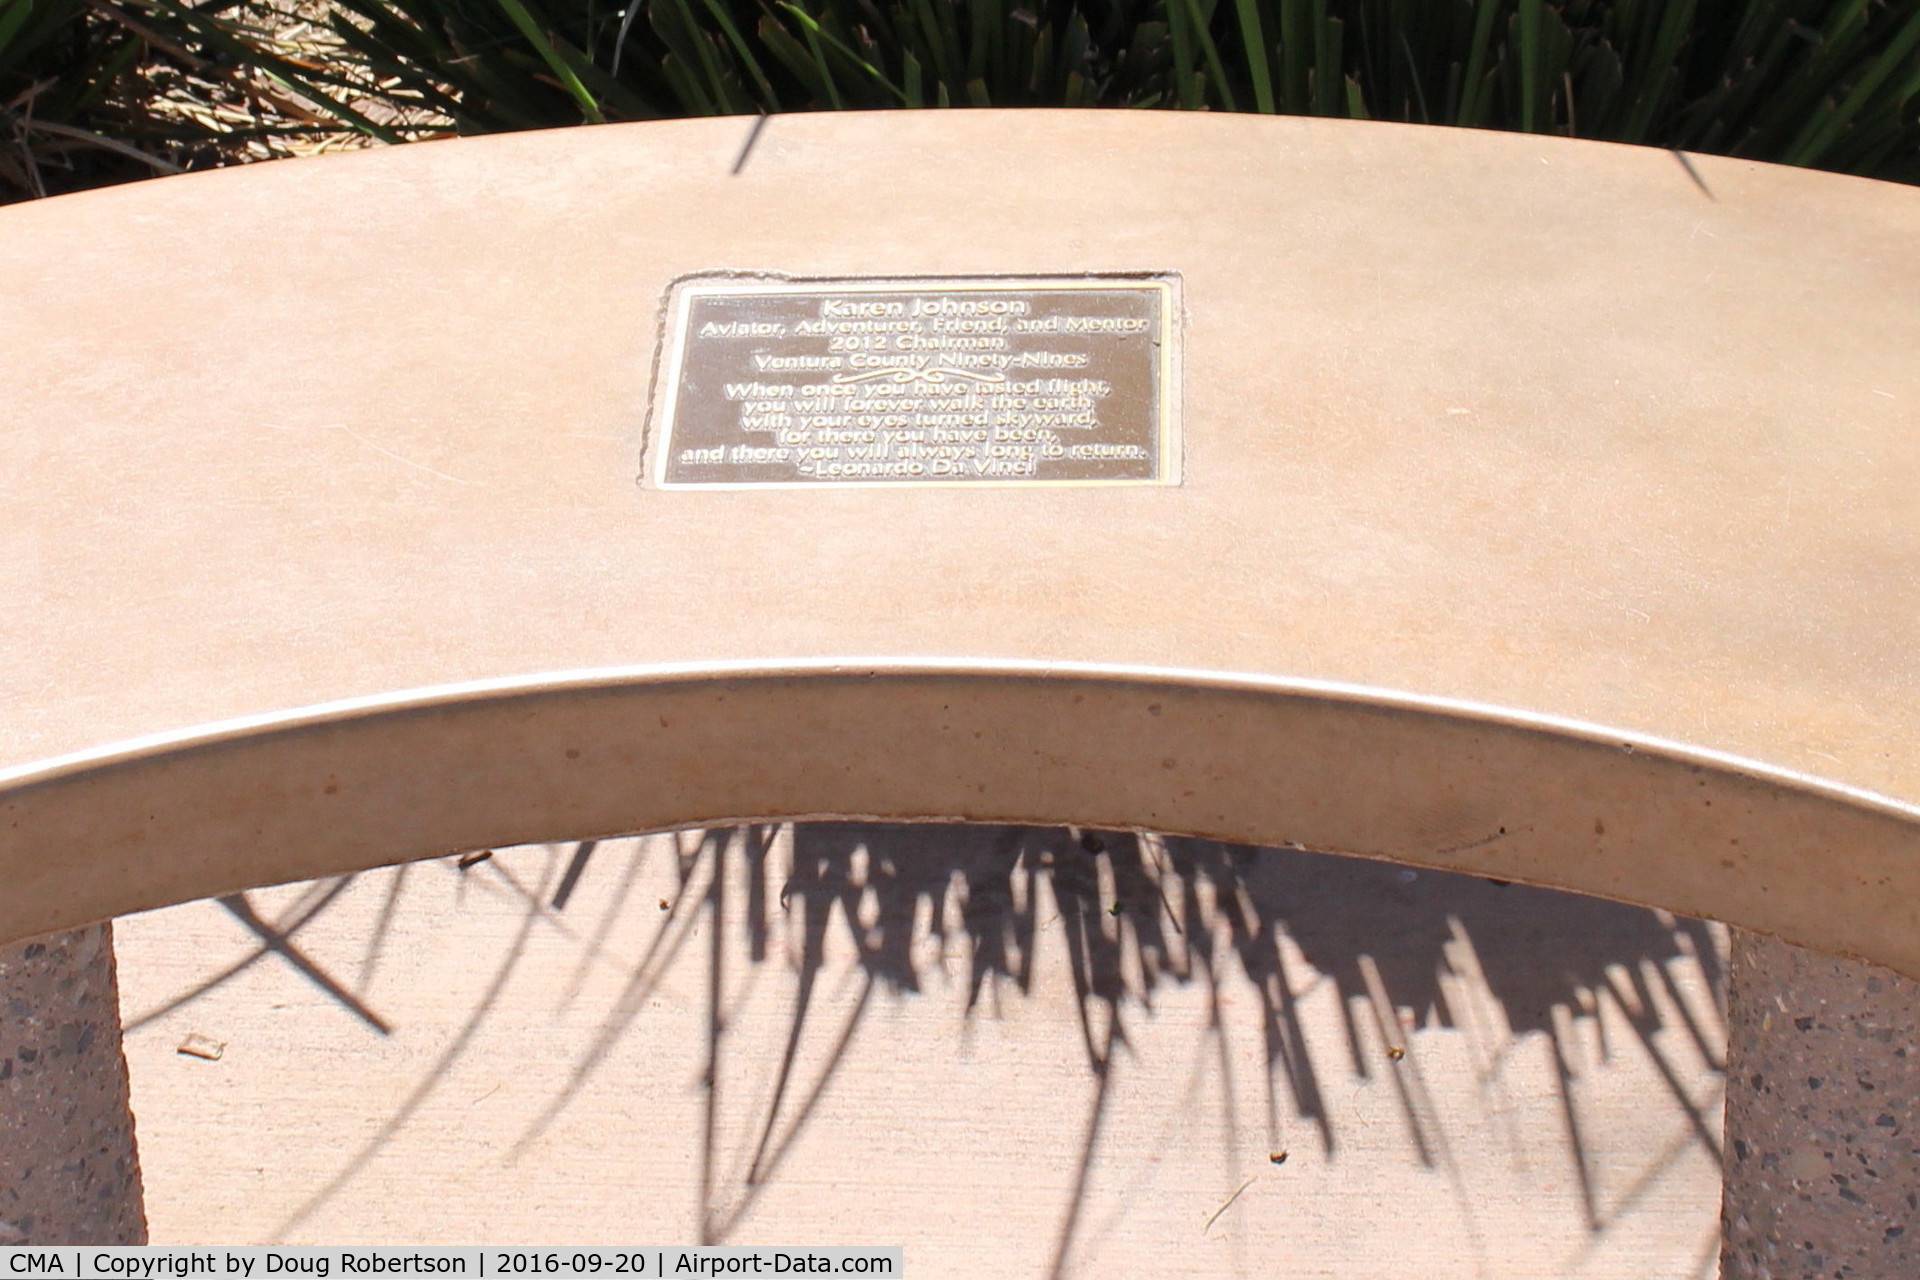 Camarillo Airport (CMA) - Tribute Bench at CMA's public Aircraft View Park outside the Waypoint Cafe in full sun